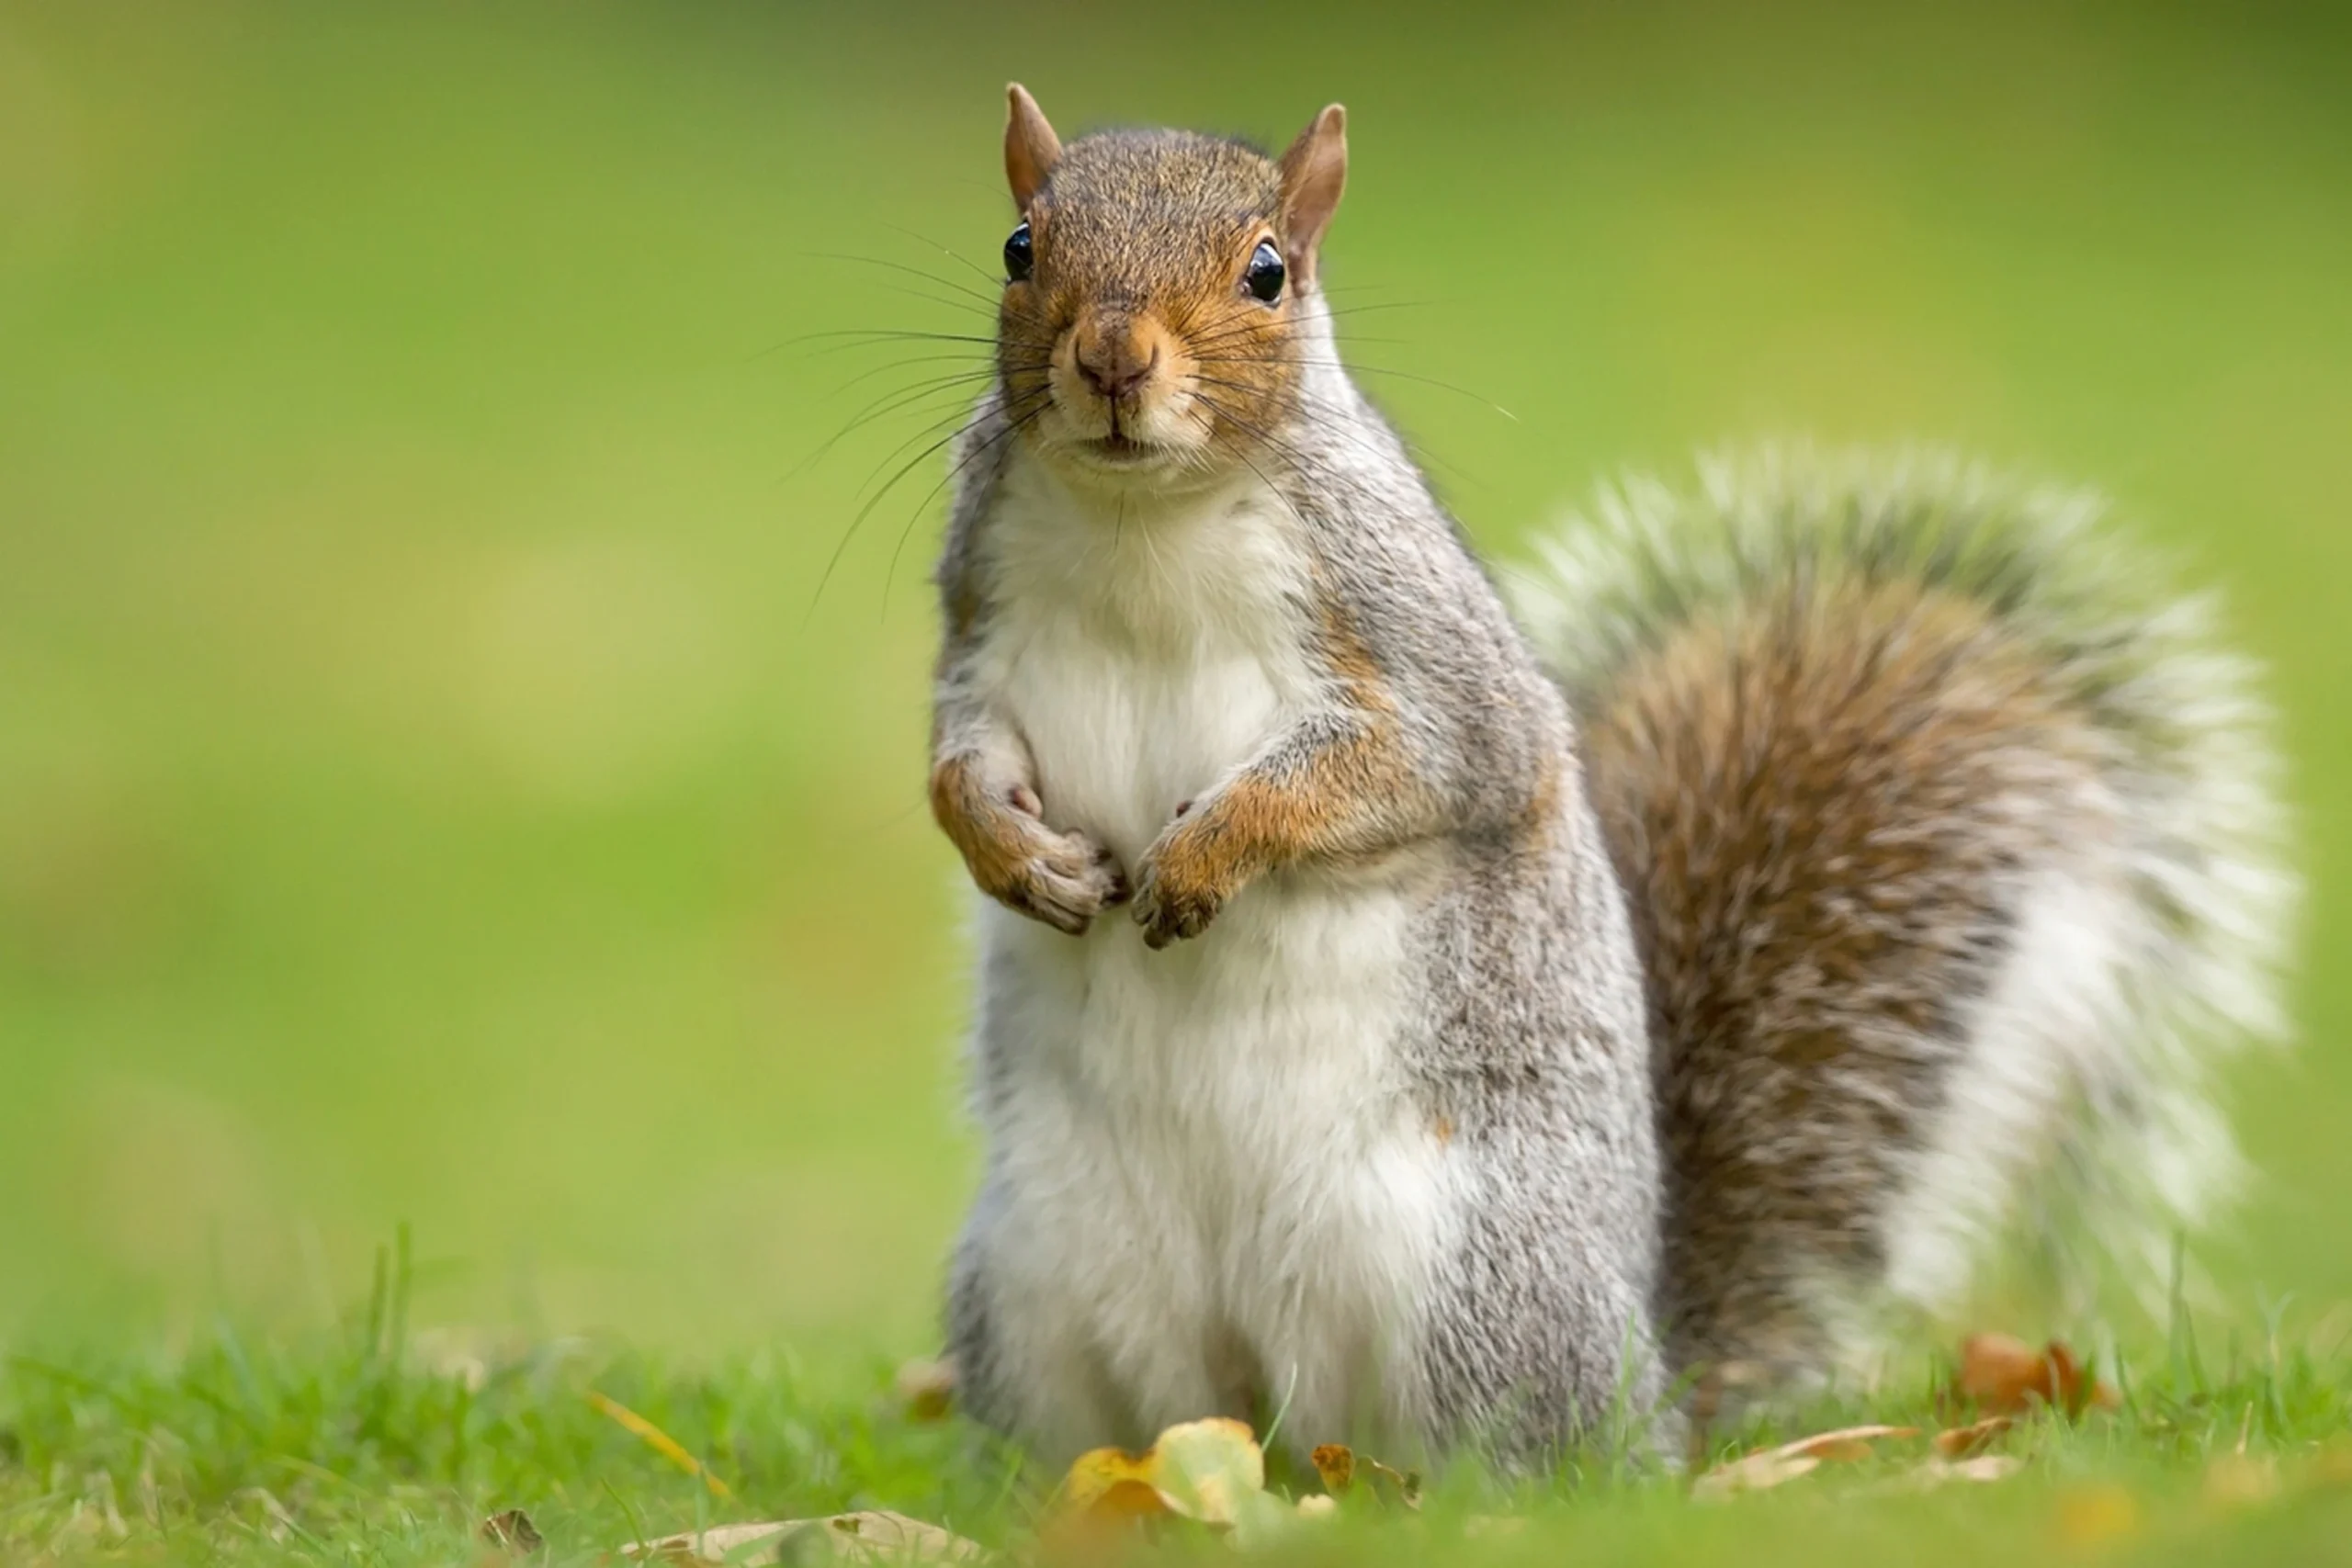 eastern-gray-squirrel-standing_3x2